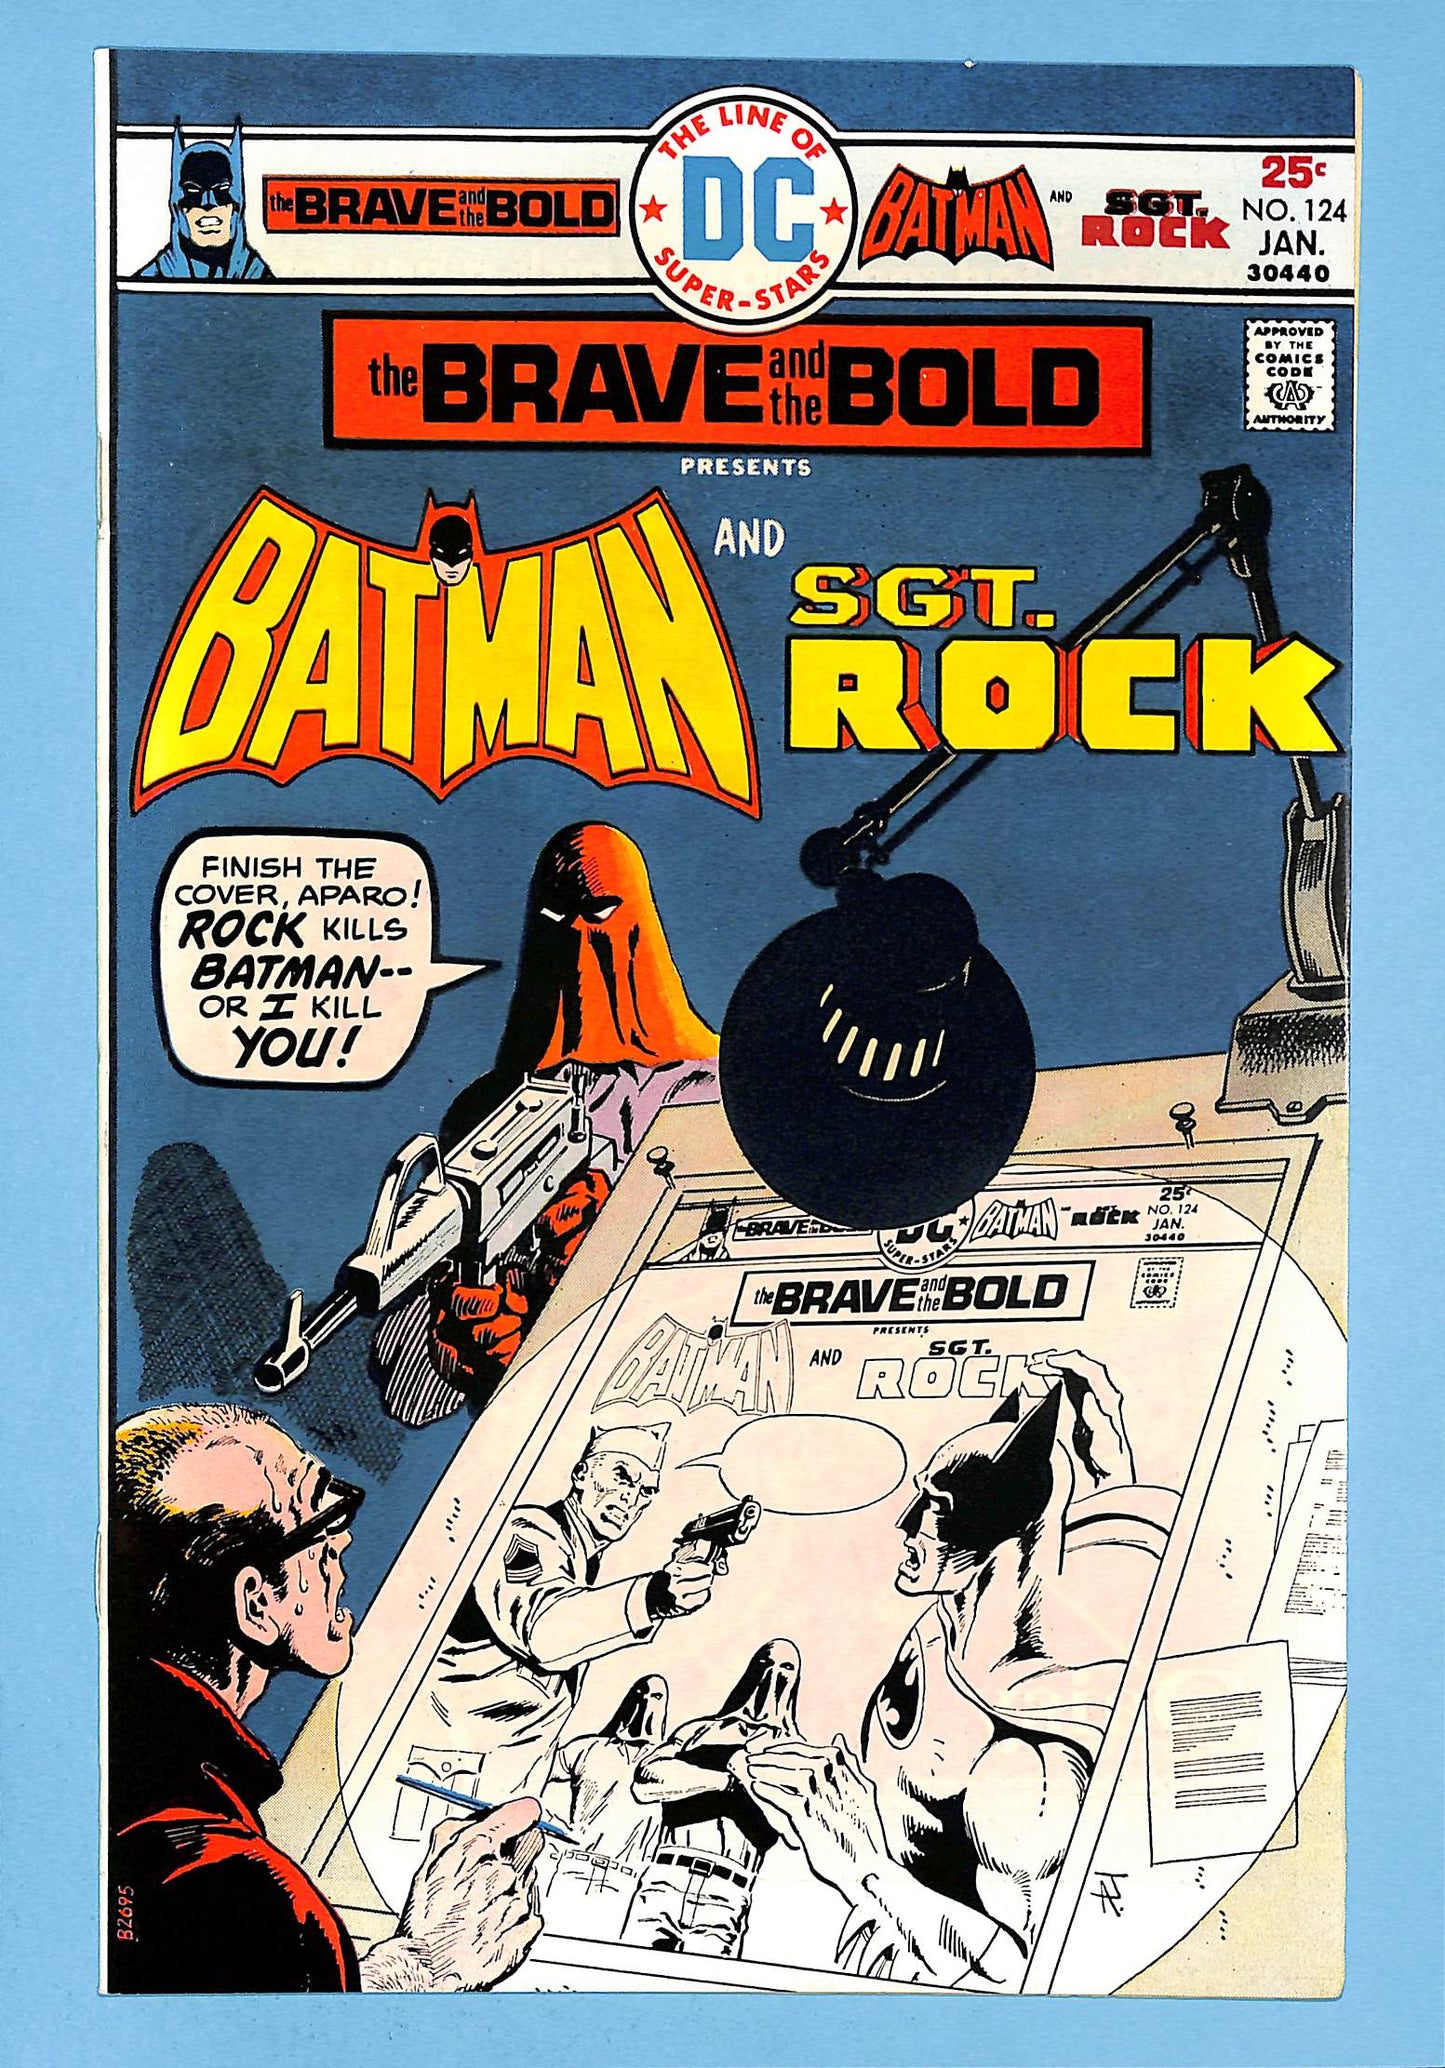 Brave and the Bold #124 Batman and Sgt. Rock